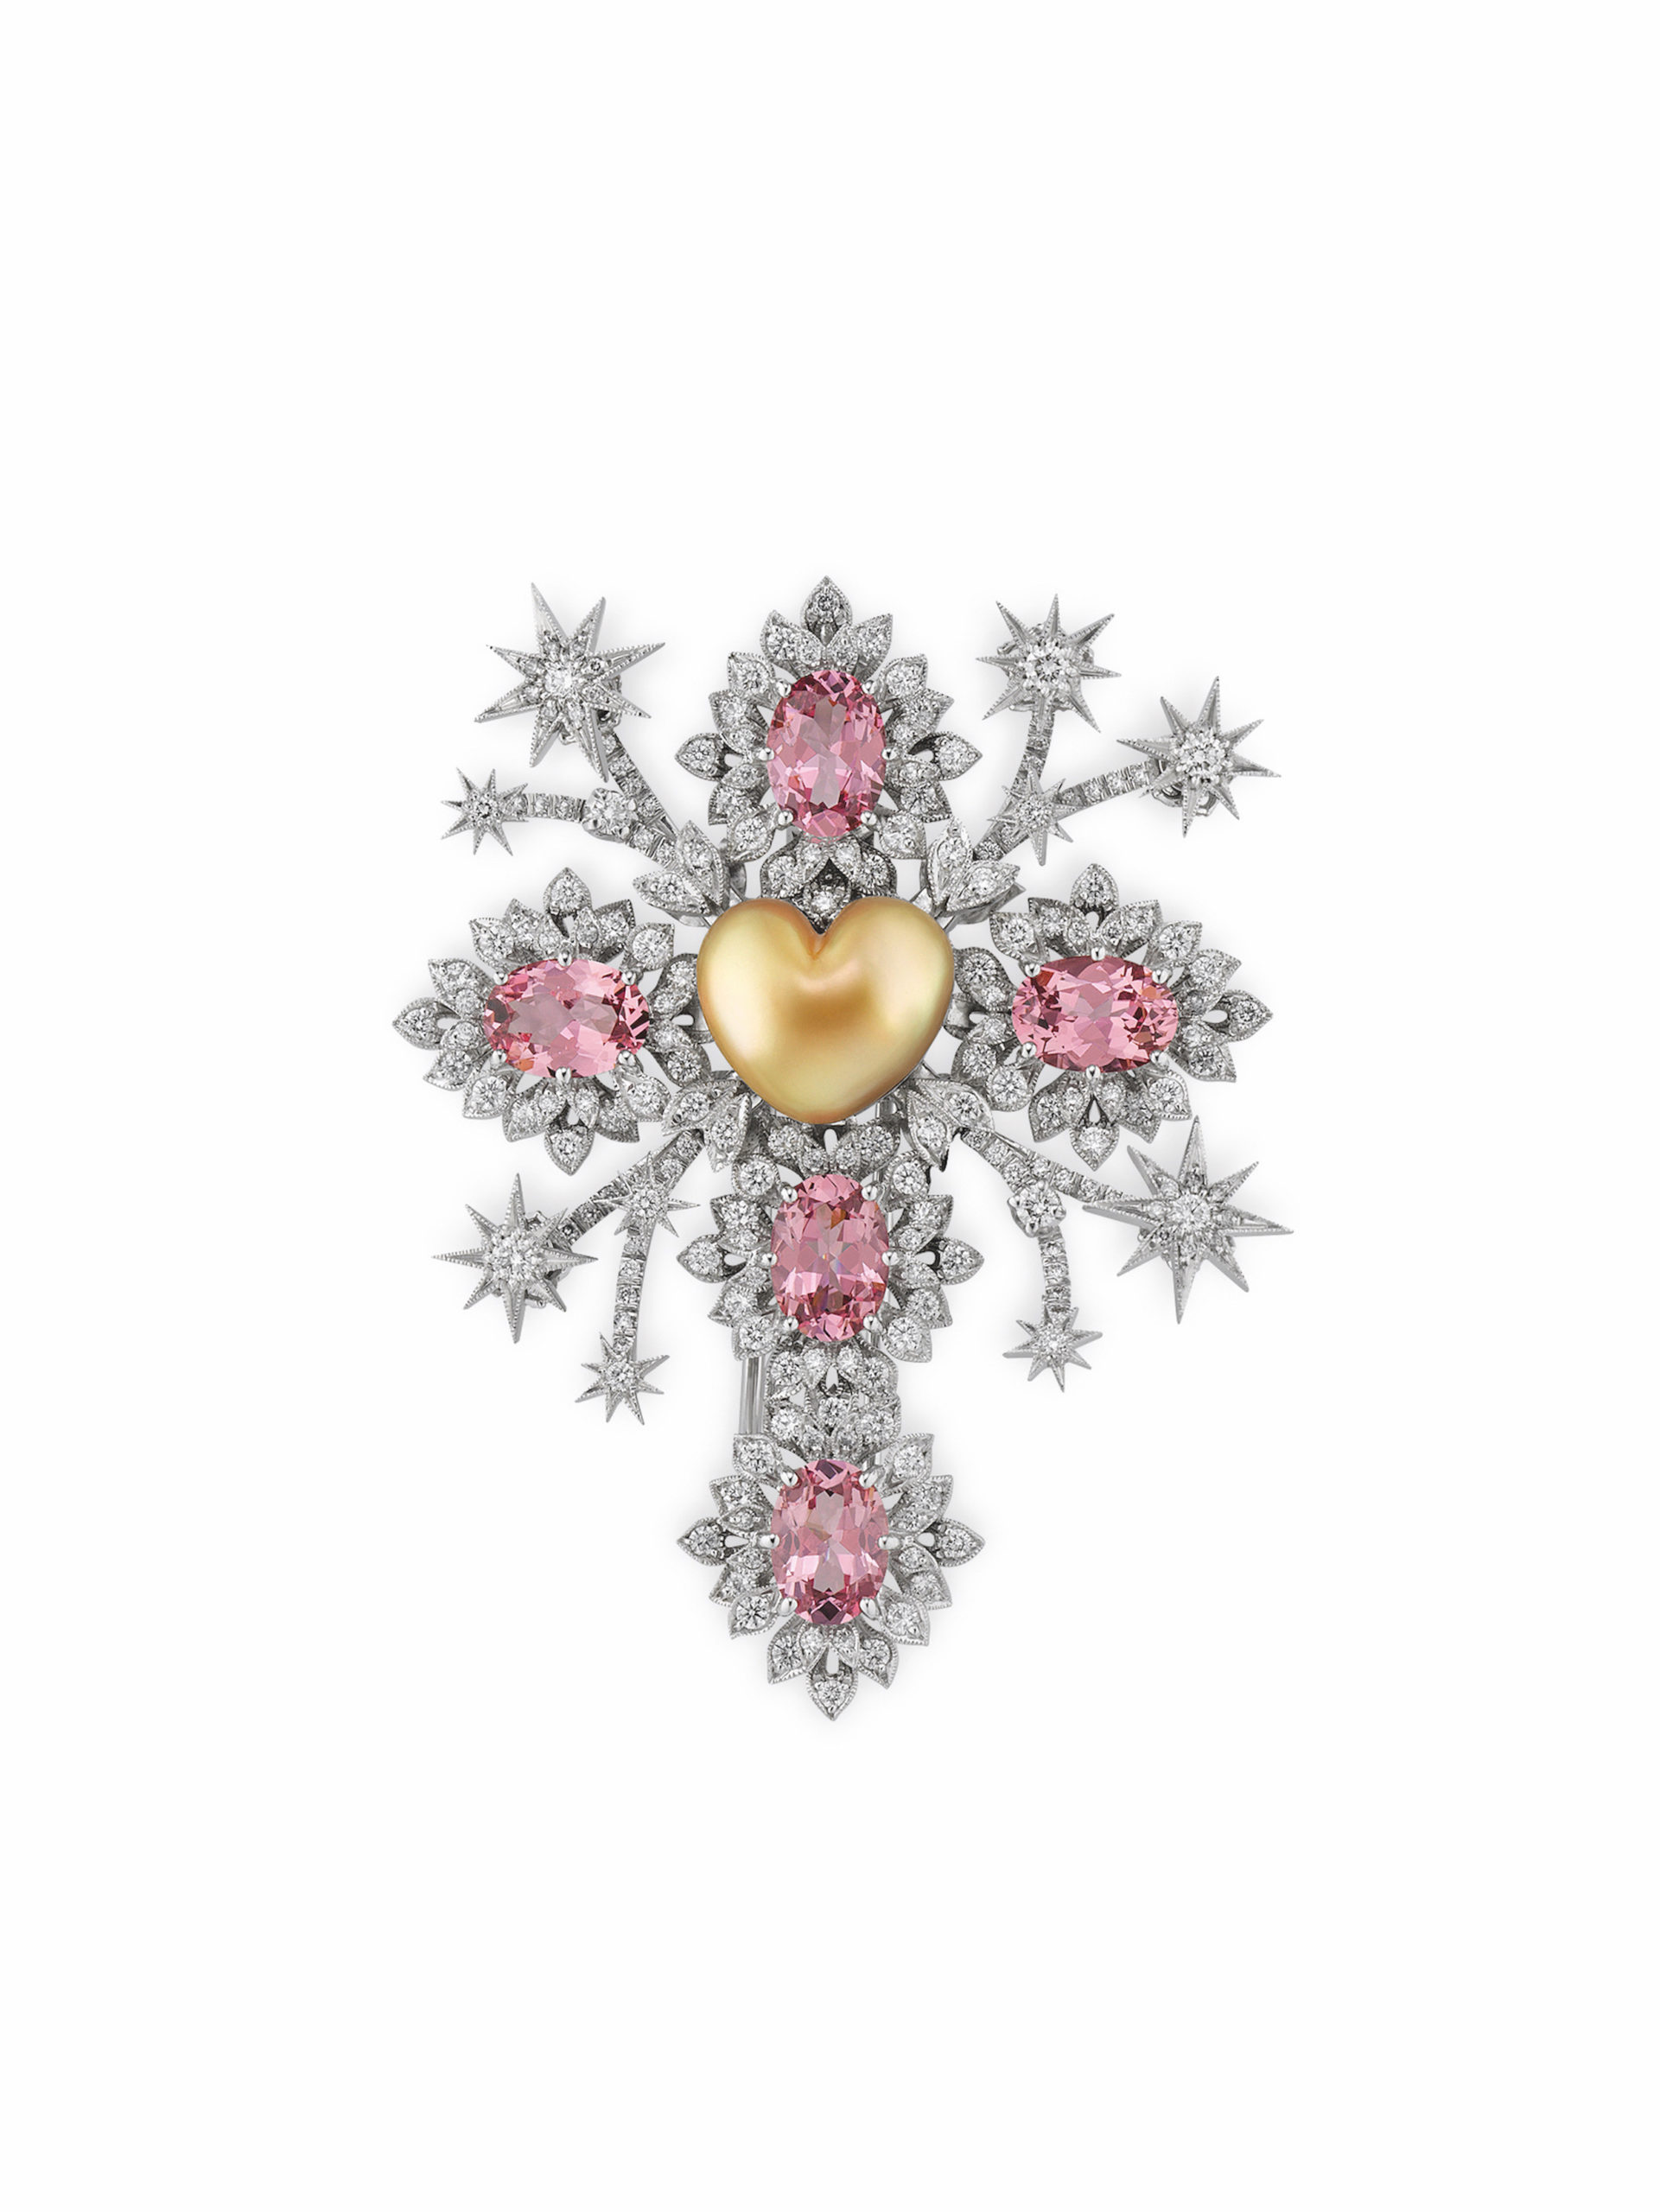 A Garden of Delights in full bloom: Hortus Deliciarum - the first Gucci High  Jewelry collection by Alessandro Michele 